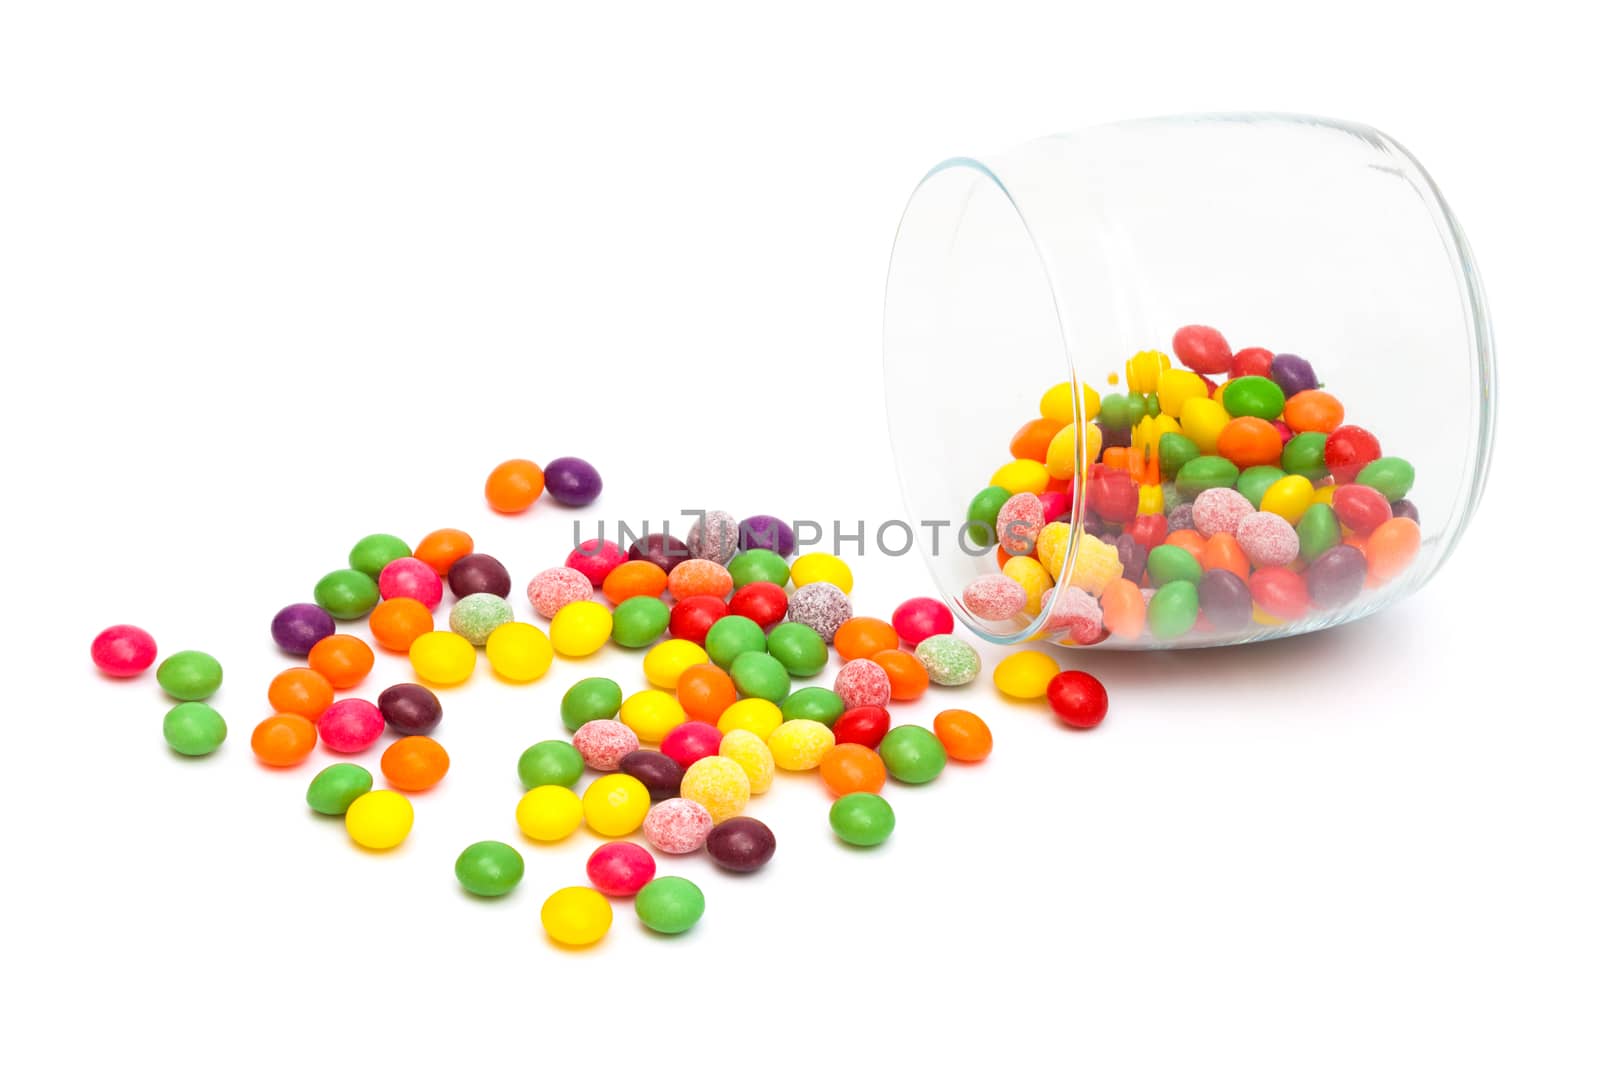 Candy in a glass jar by terex